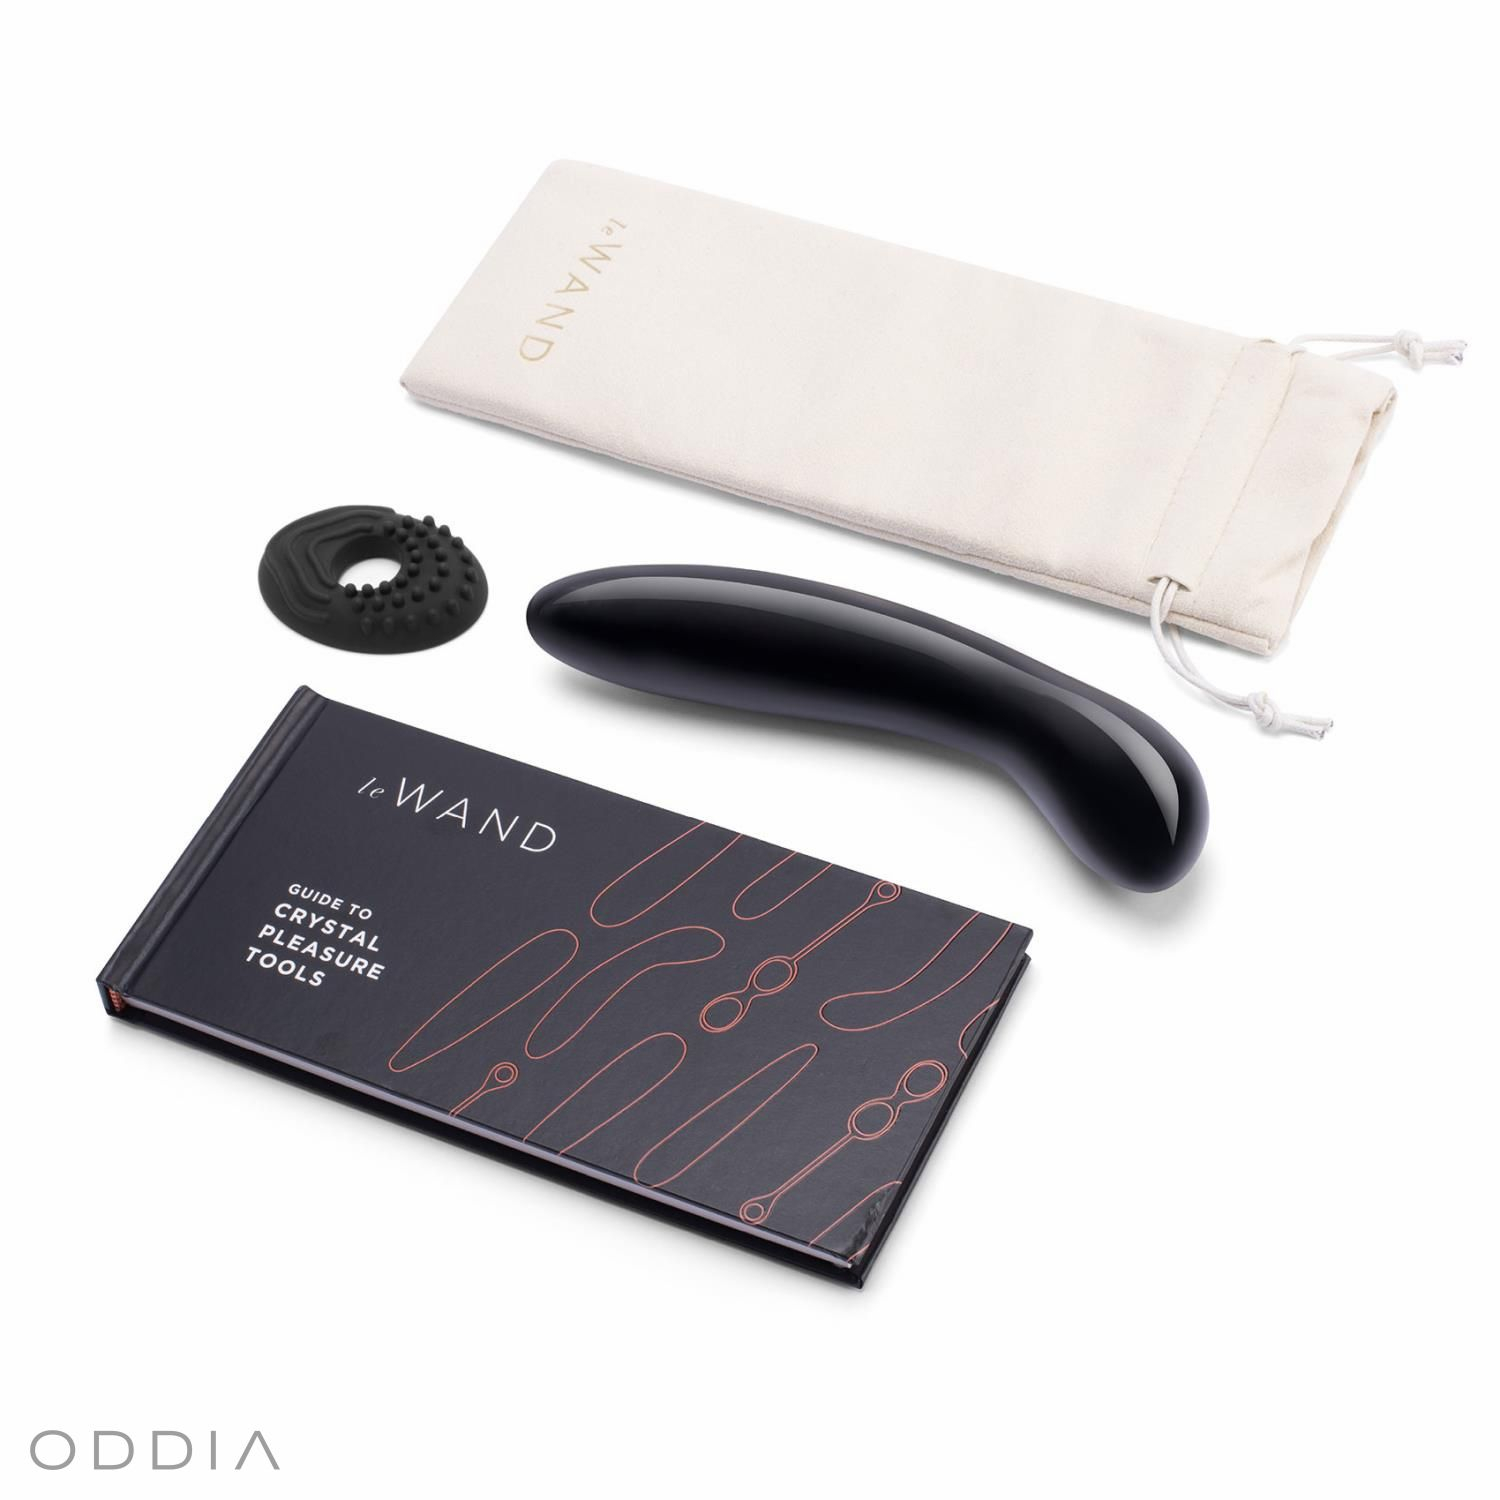 Luxurious curved dildo from the brand leWAND, made from real black obsidian - curved for G-spot stimulation